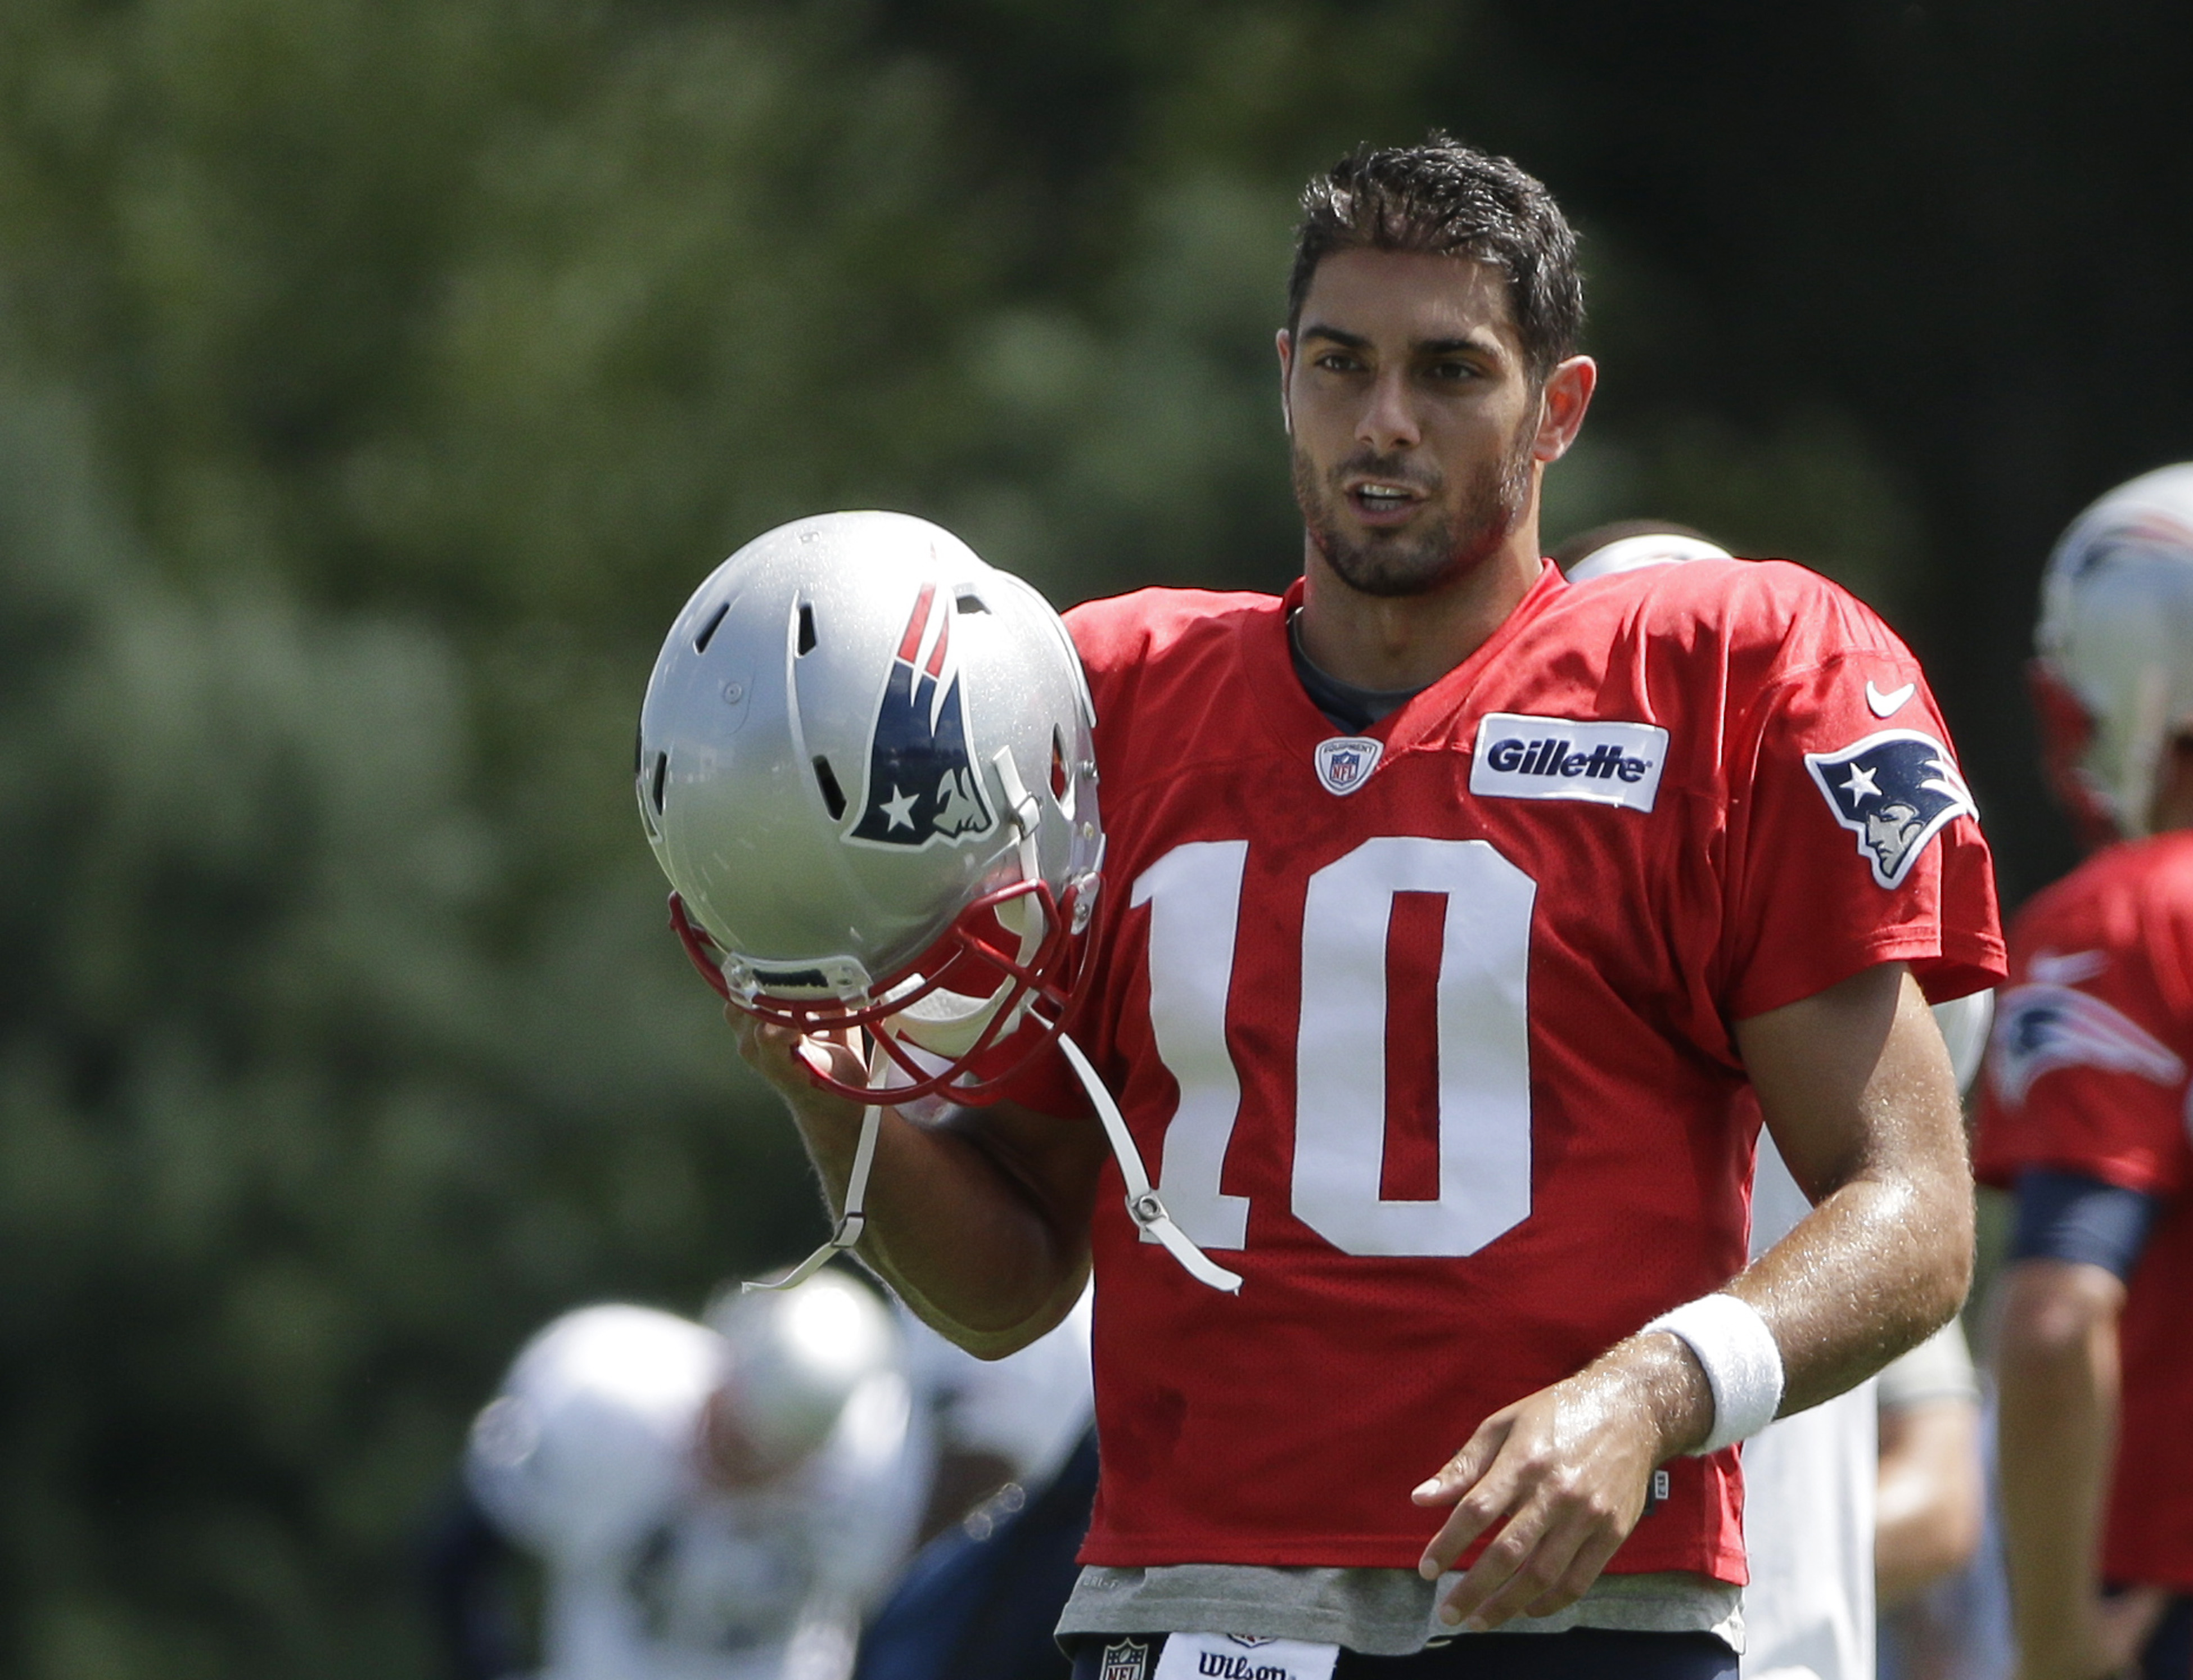 New England Patriots quarterback Jimmy Garoppolo removes his helmet during an NFL football training camp practice with the Chicago Bears. (AP Photo/Steven Senne)